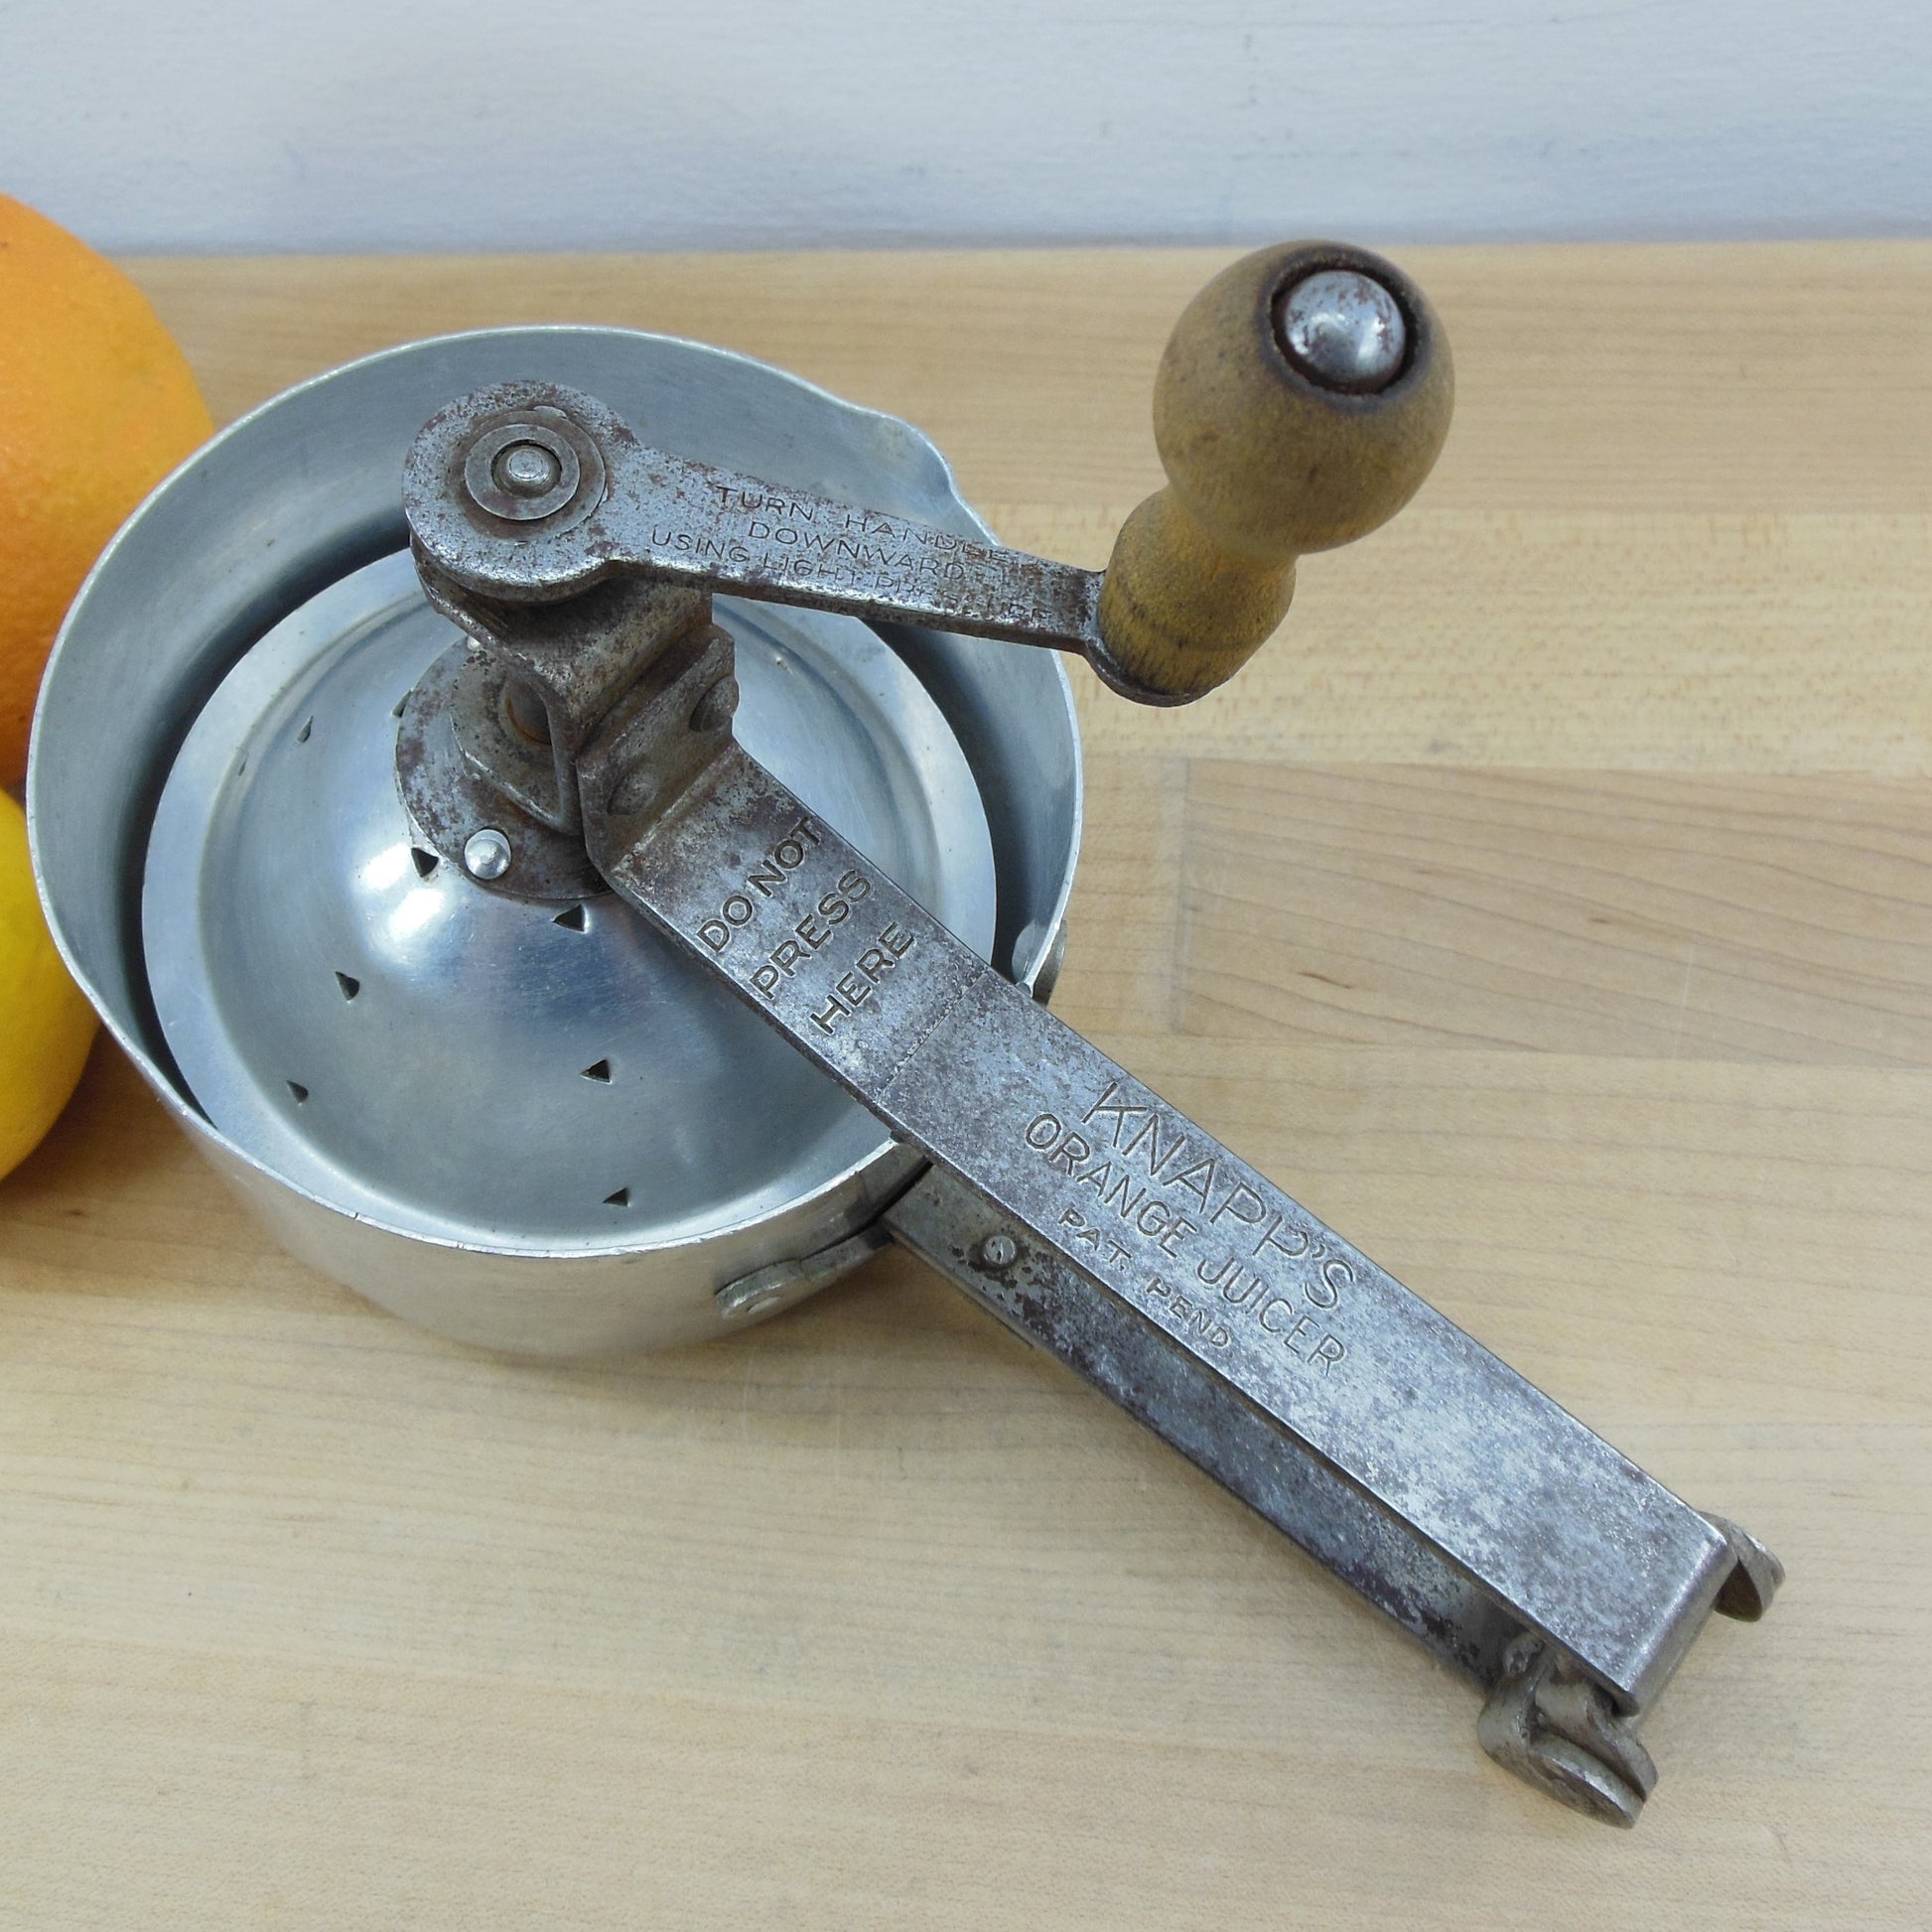 Juicers, Processors, Hand Crank Tools to last a lifetime? (homestead forum  at permies)